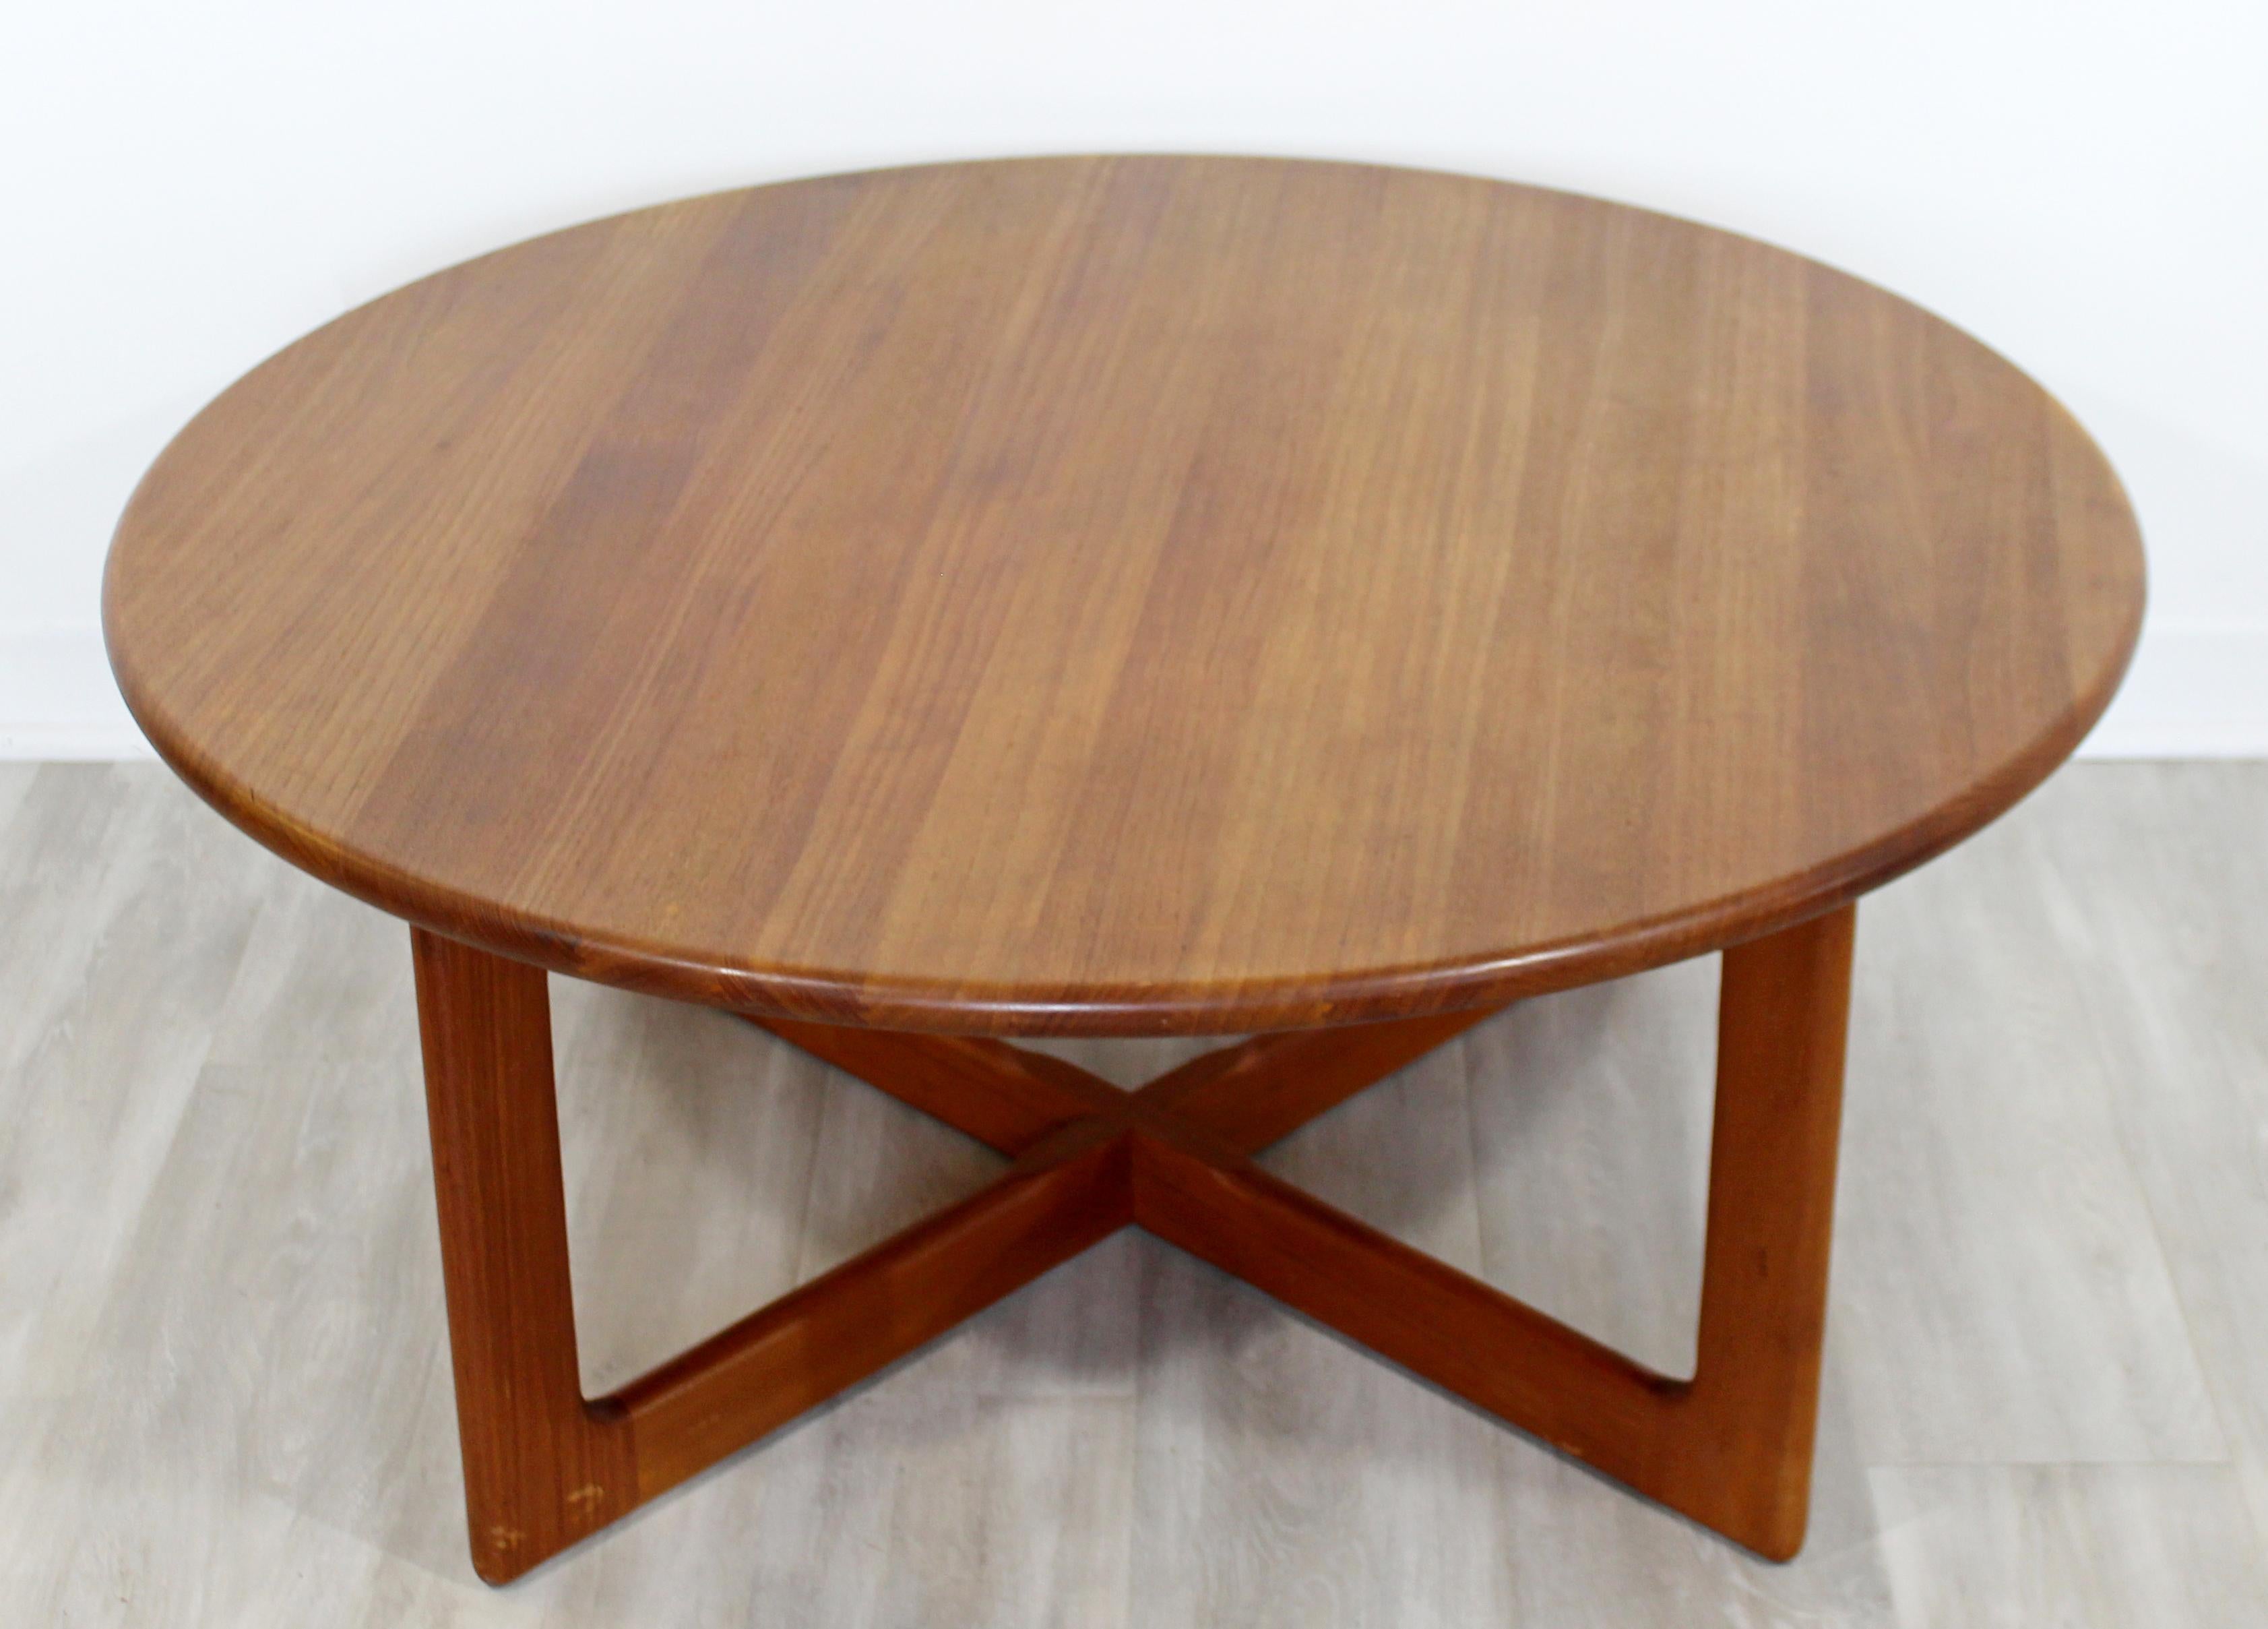 For your consideration is a beautiful, teak coffee table, made in Denmark, circa 1960s. In excellent condition. The dimensions are 41